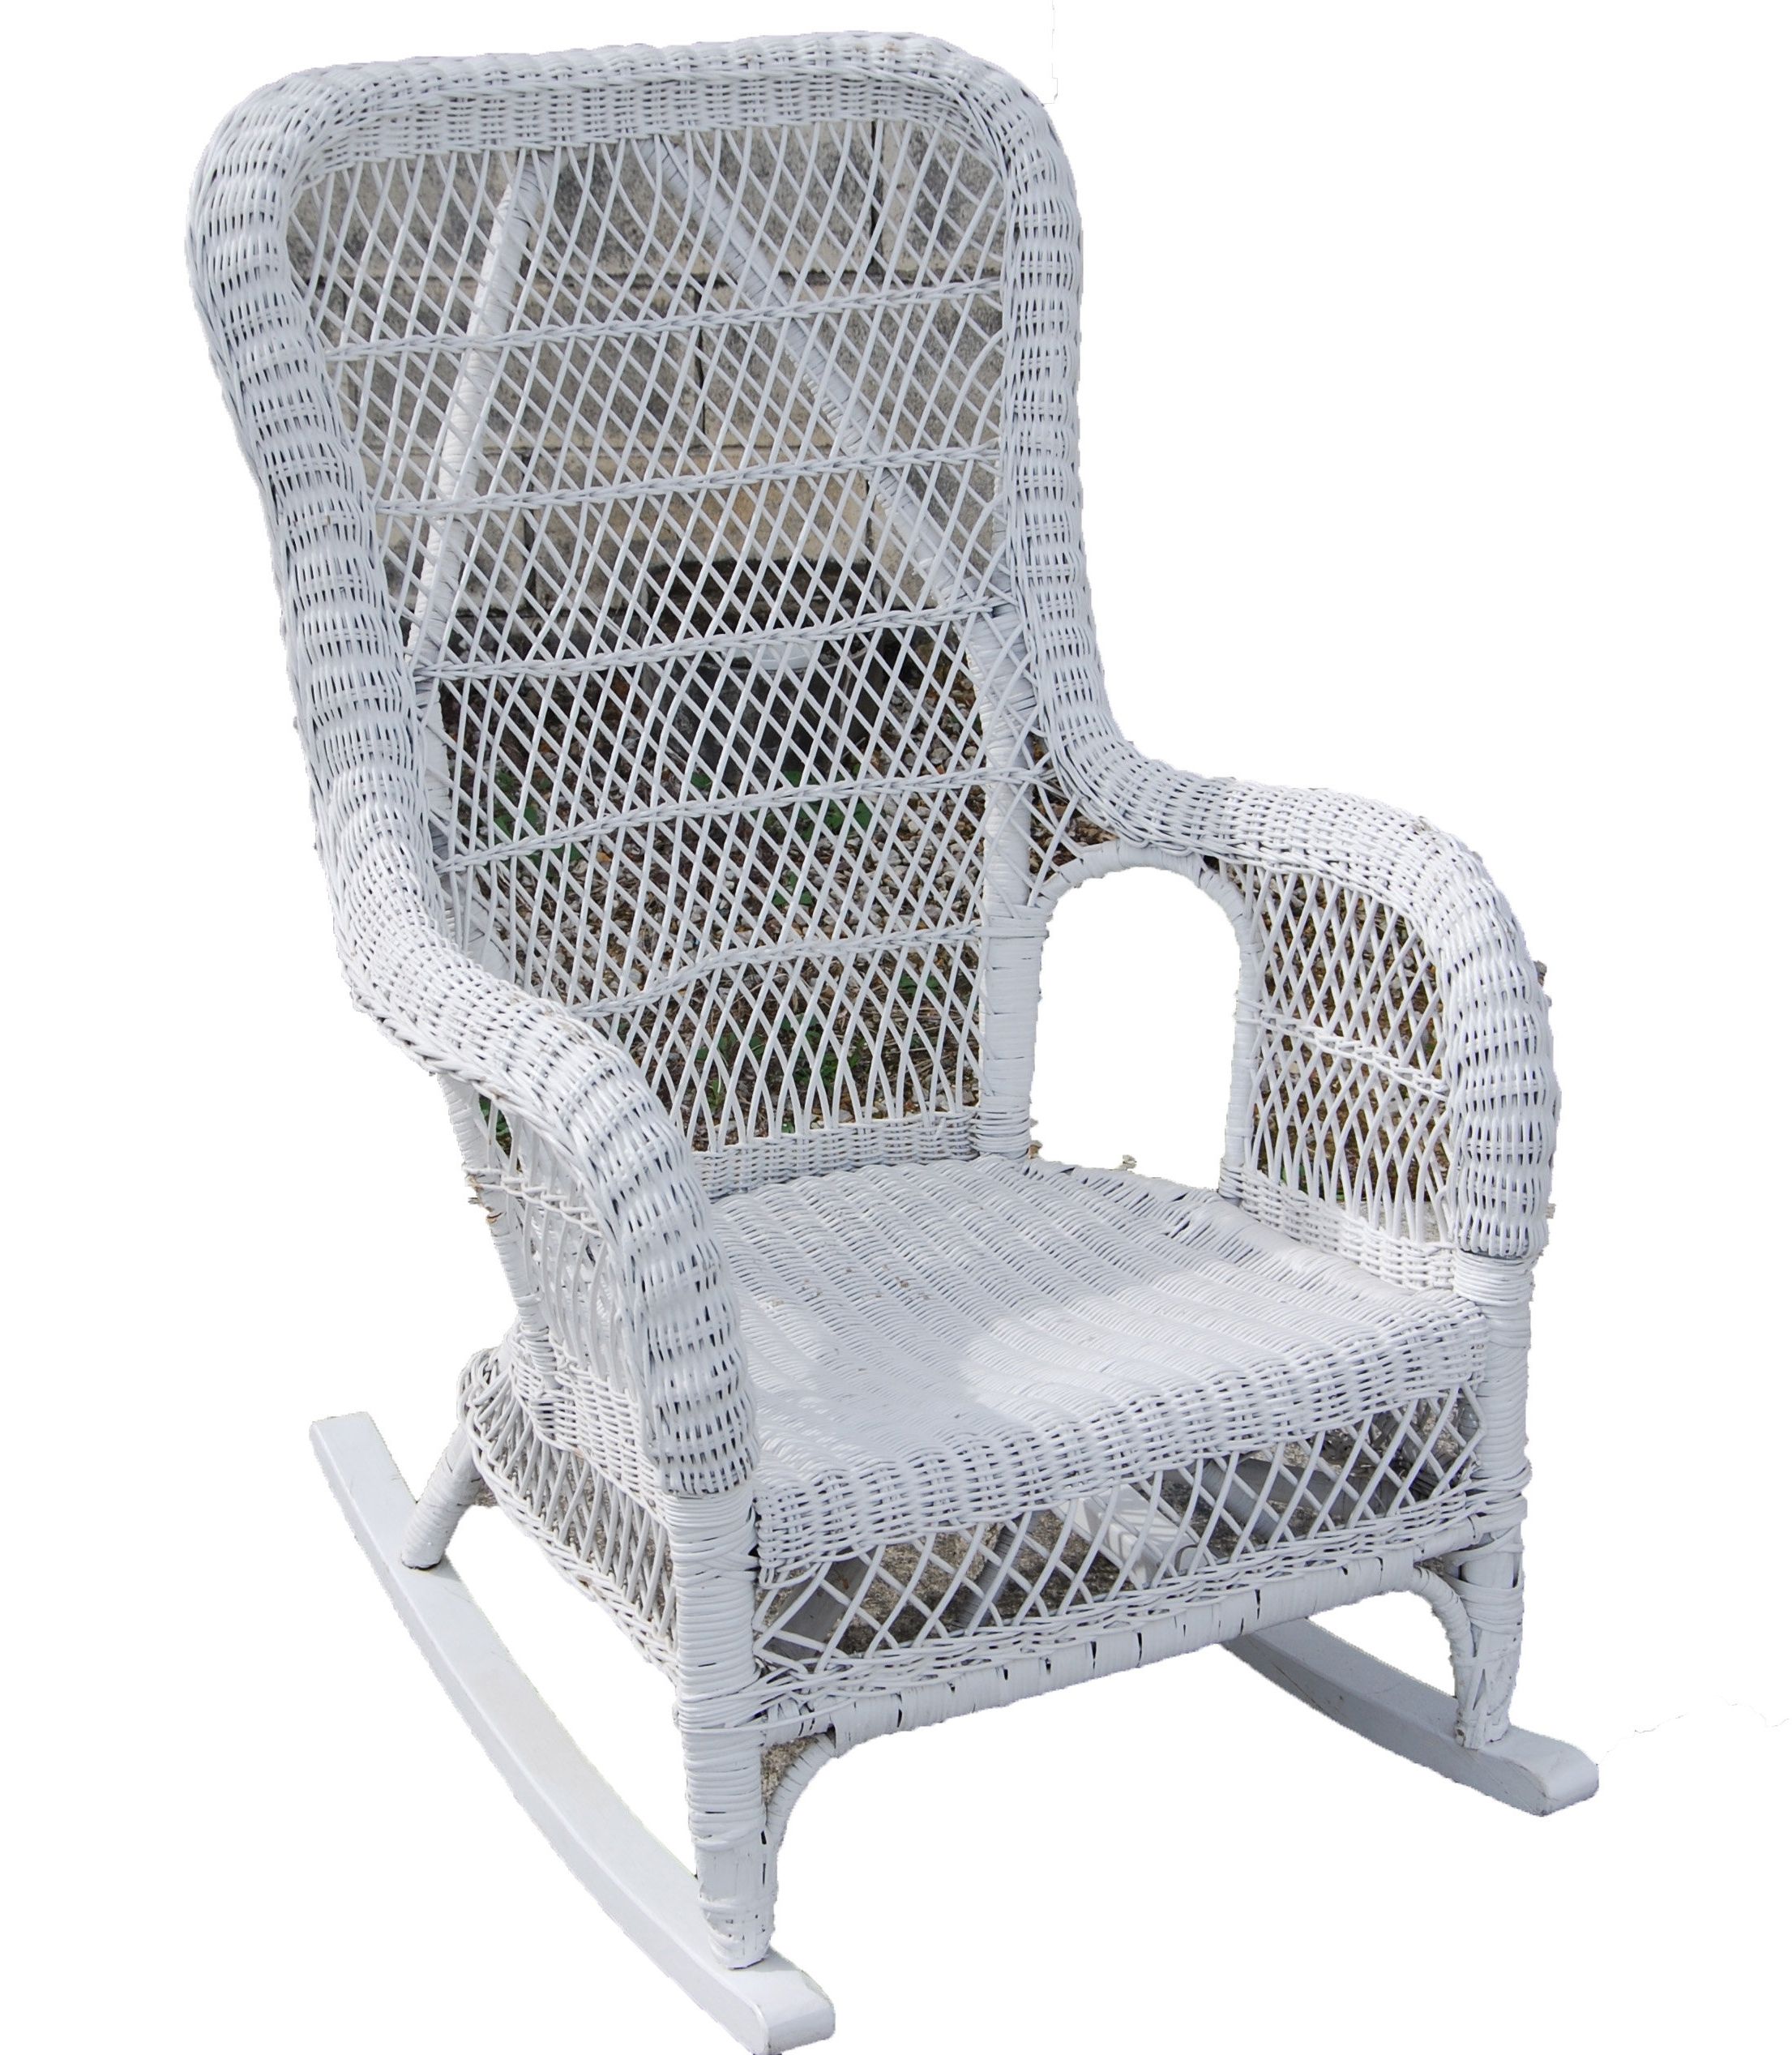 Preferred Wicker Rocking Chairs For Porch Arm Chair Wicker & Loom Round Back Intended For Wicker Rocking Chair With Magazine Holder (View 13 of 15)